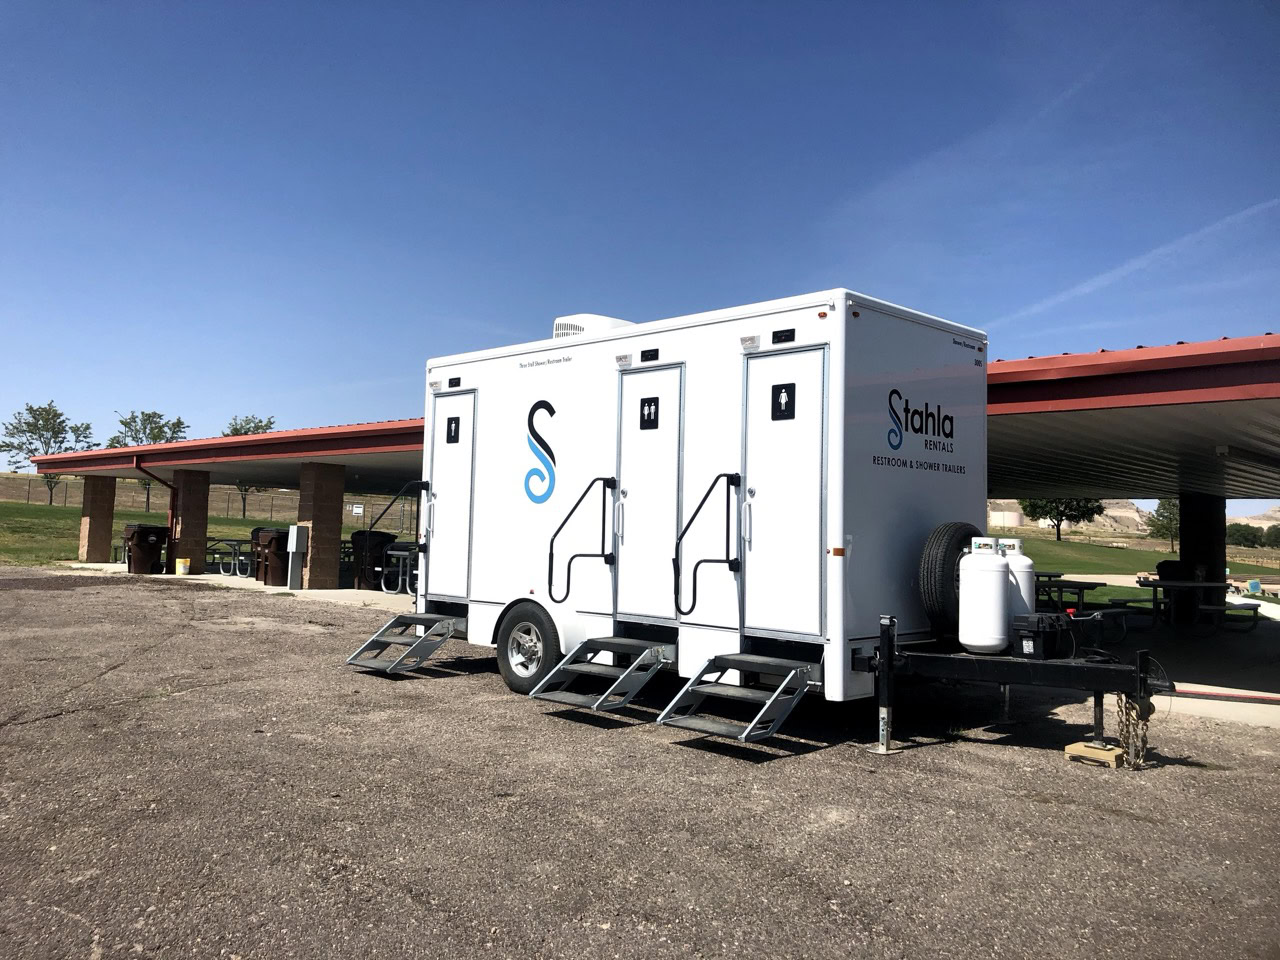 a portable 3 stall shower restroom trailer is parked on asphalt near a park shelter, equipped with steps, ventilation, and stahla rental branding, set against a clear sky backdrop.